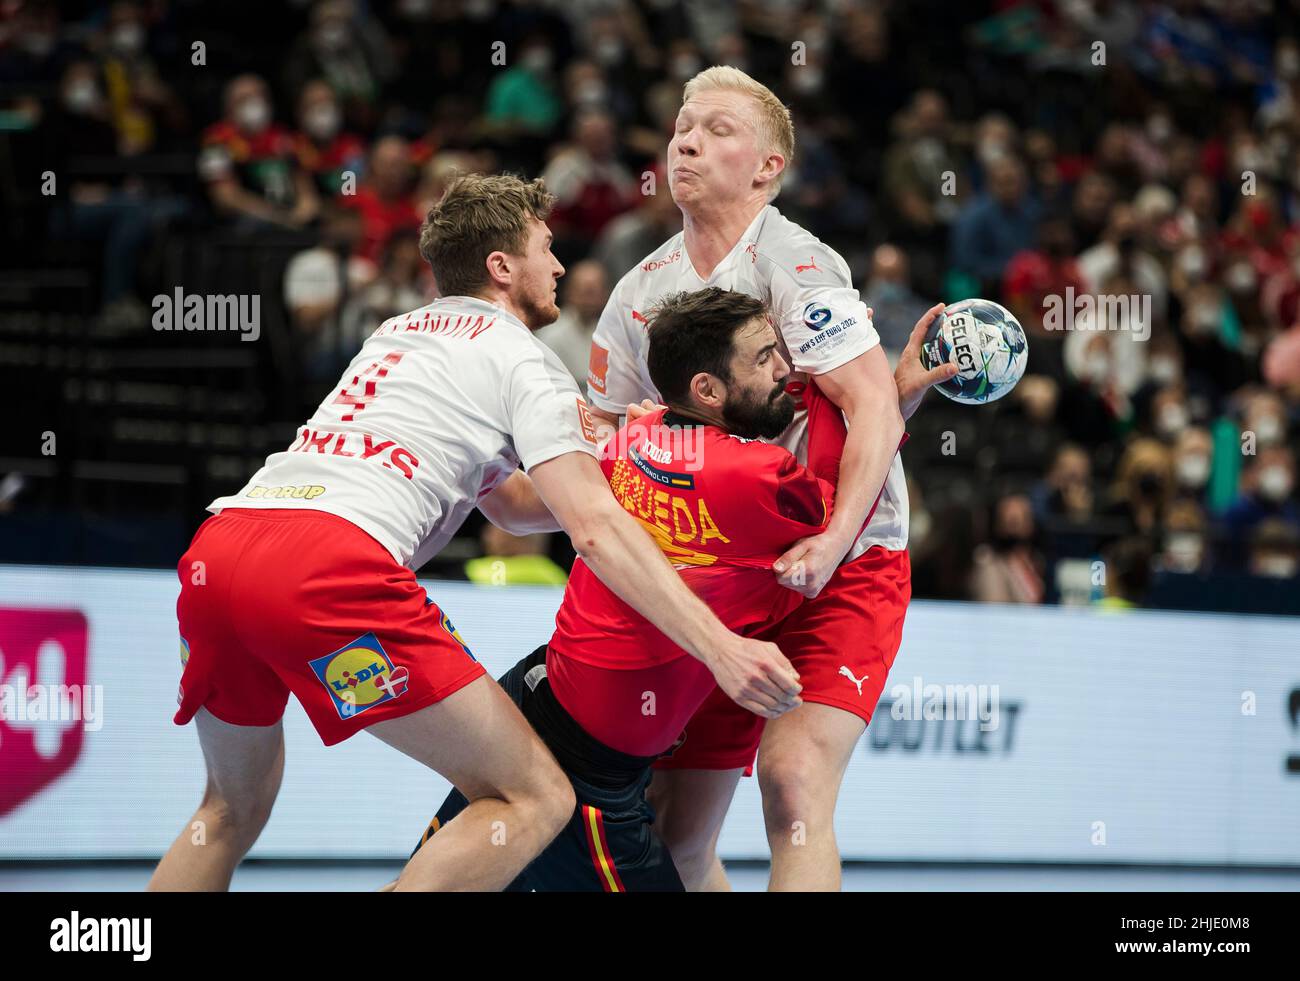 Budapest, Hungary, 28th January 2022. Jorge Maqueda Peno of Spain competes during the Men's EHF EURO 2022, Semi Final match between Spain v Denmark in Budapest, Hungary. January 28, 2022. Credit: Nikola Krstic/Alamy Stock Photo